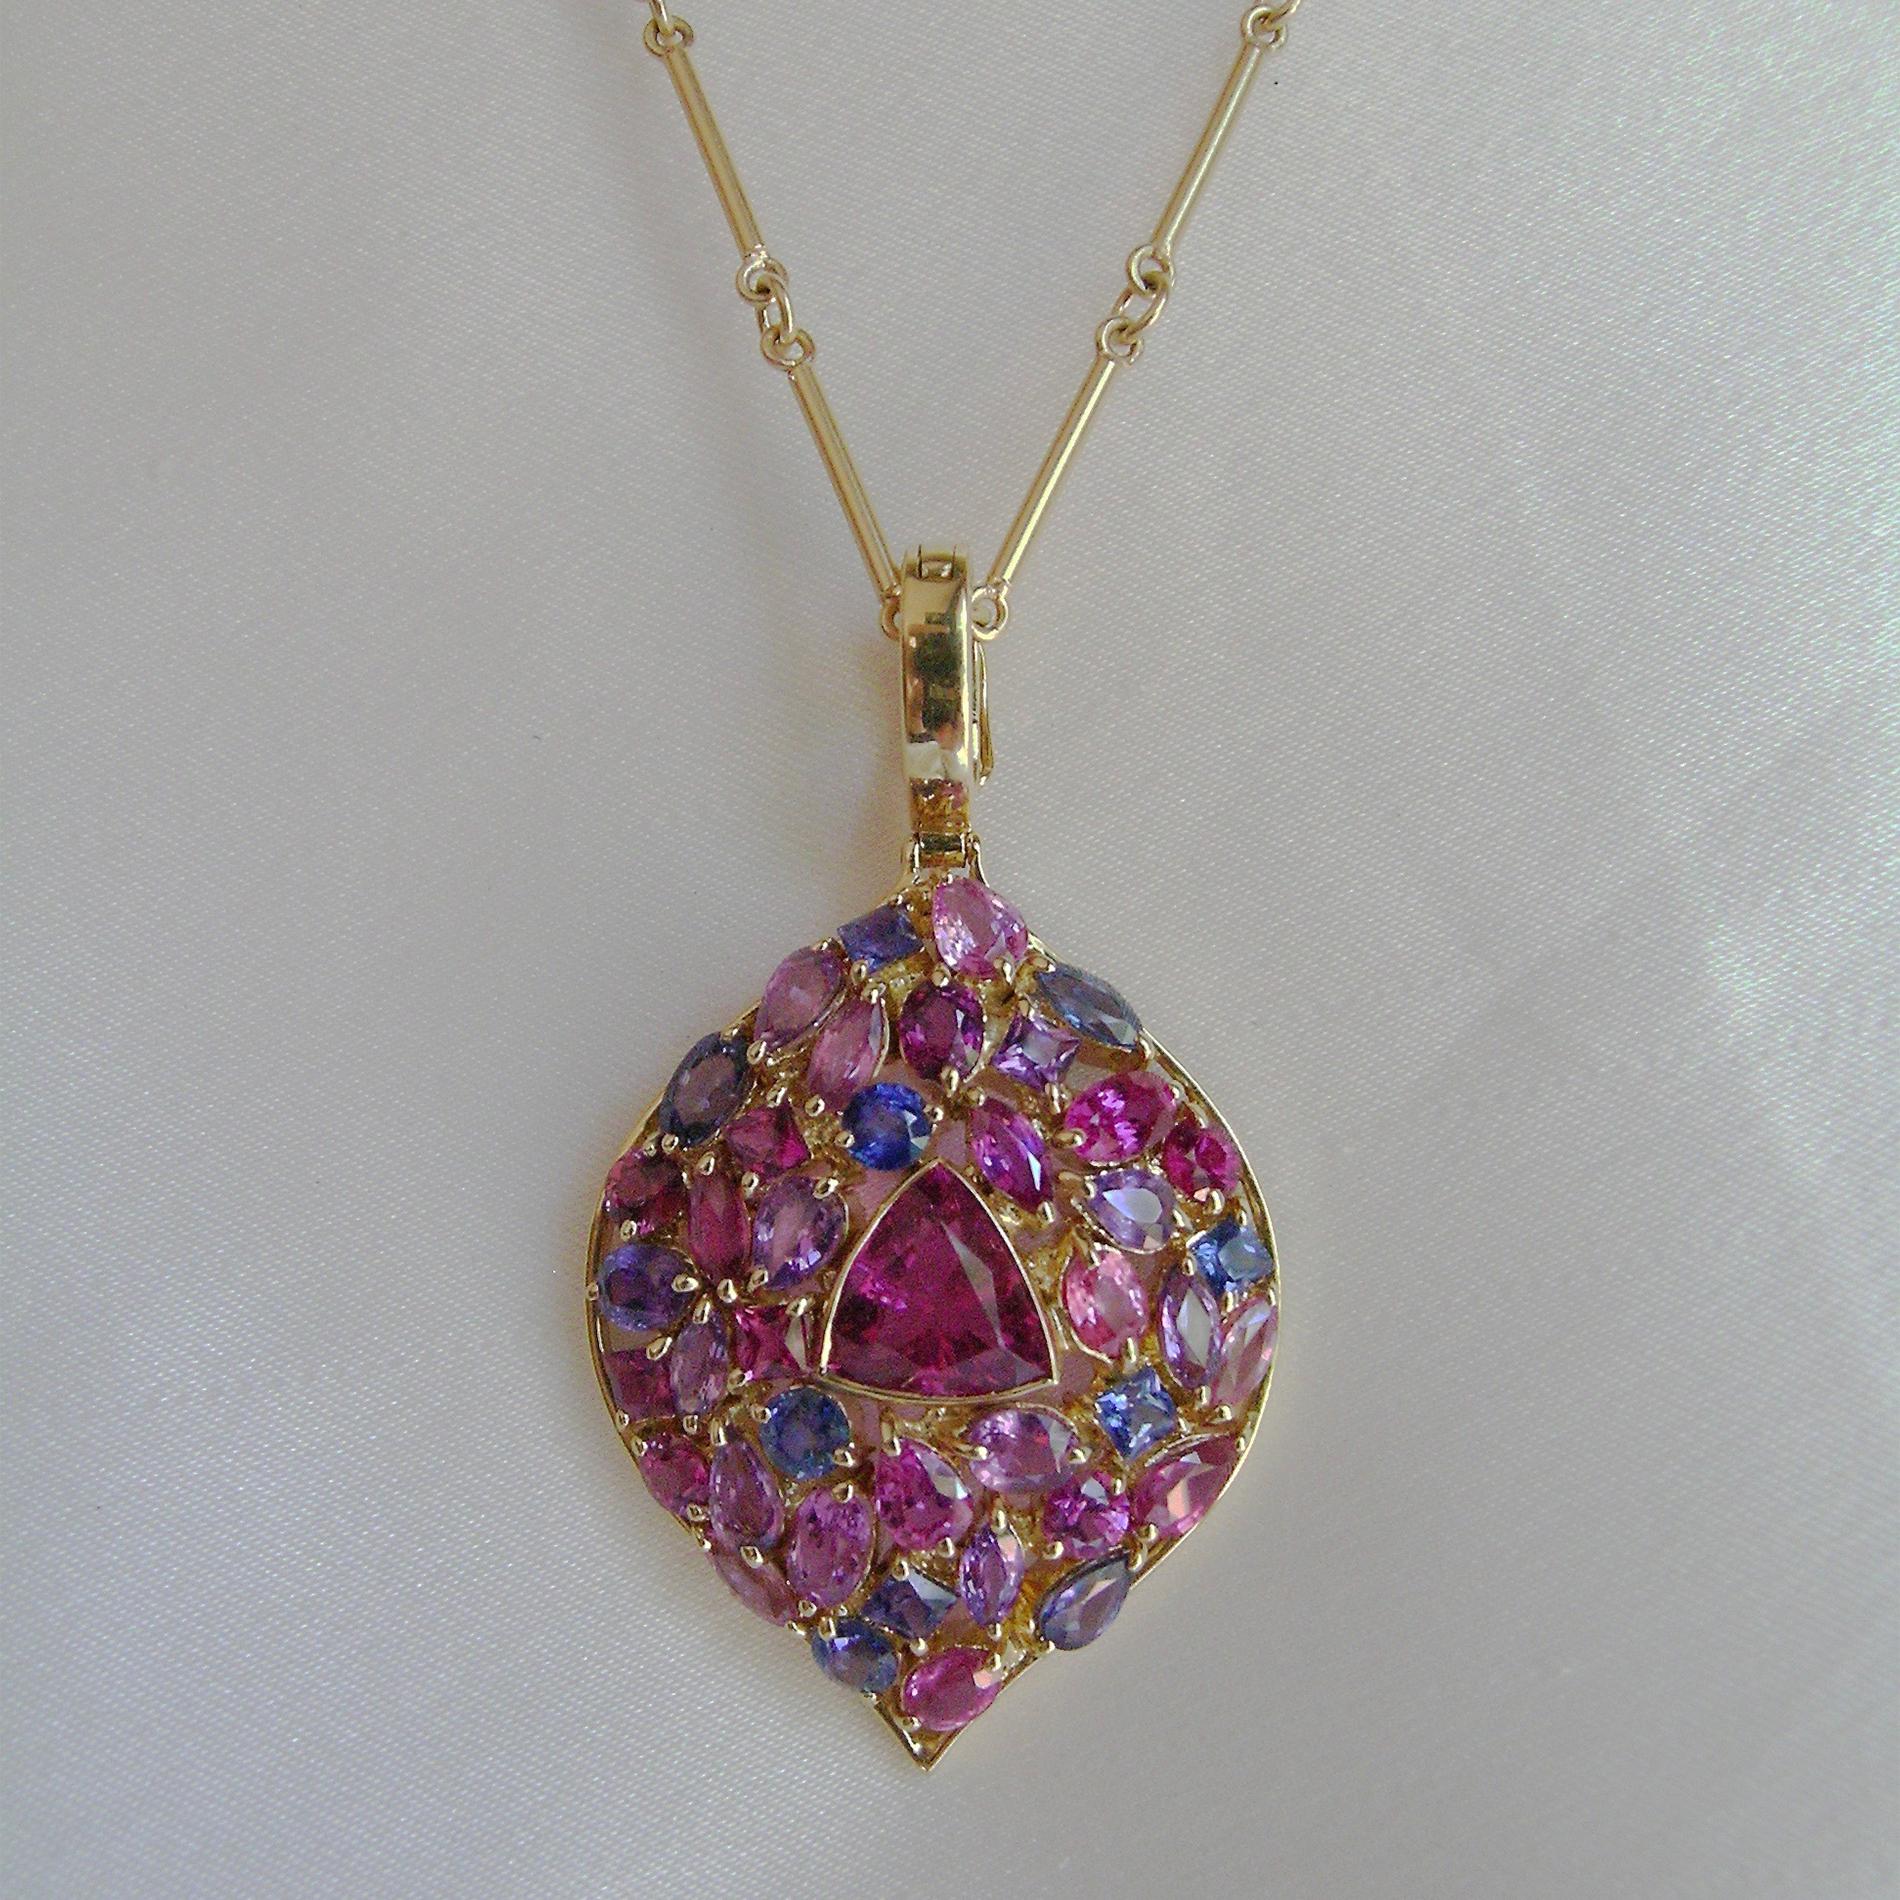 14 cts. of Rubelite, Sapphire and Tourmaline are set into 18k Gold for a very colorful and bold pendant.  If you love color then this is a great pendant for you.  The stone in the middle is the rubelite tourmaline, the deepest red of all the